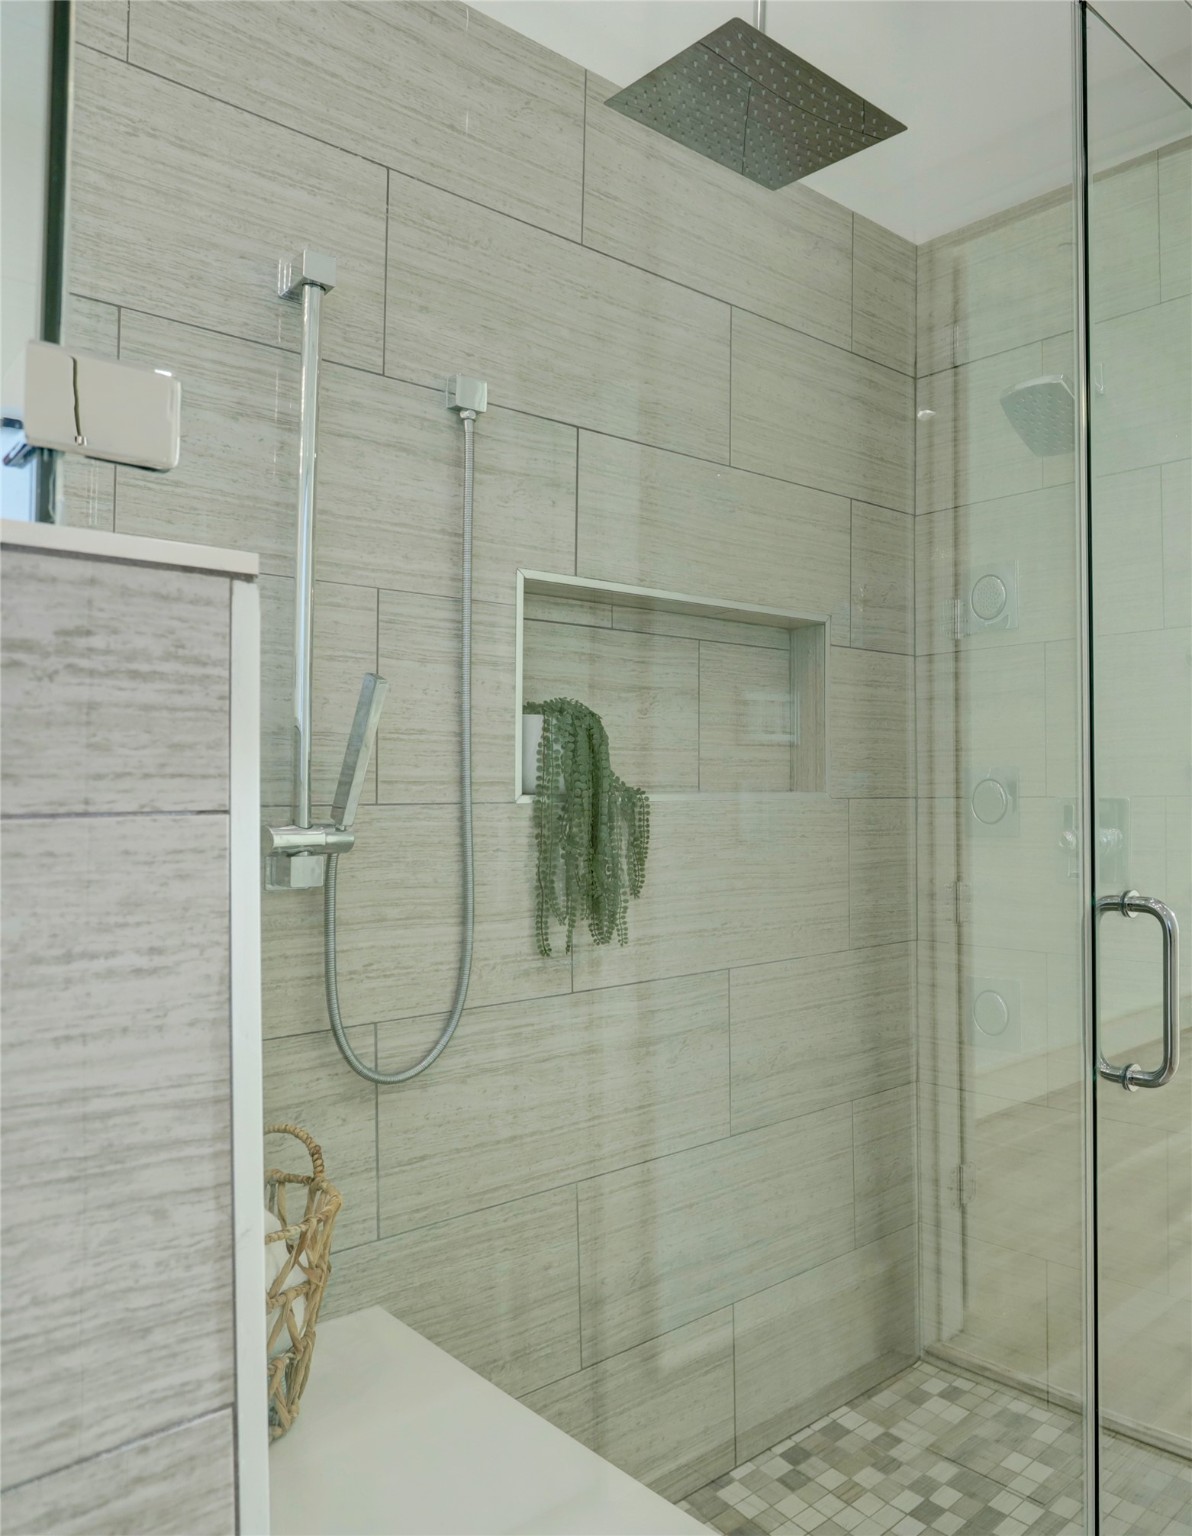 This walk-in shower is incredible with a luxury feel, multiple shower heads, and ample drainage options.